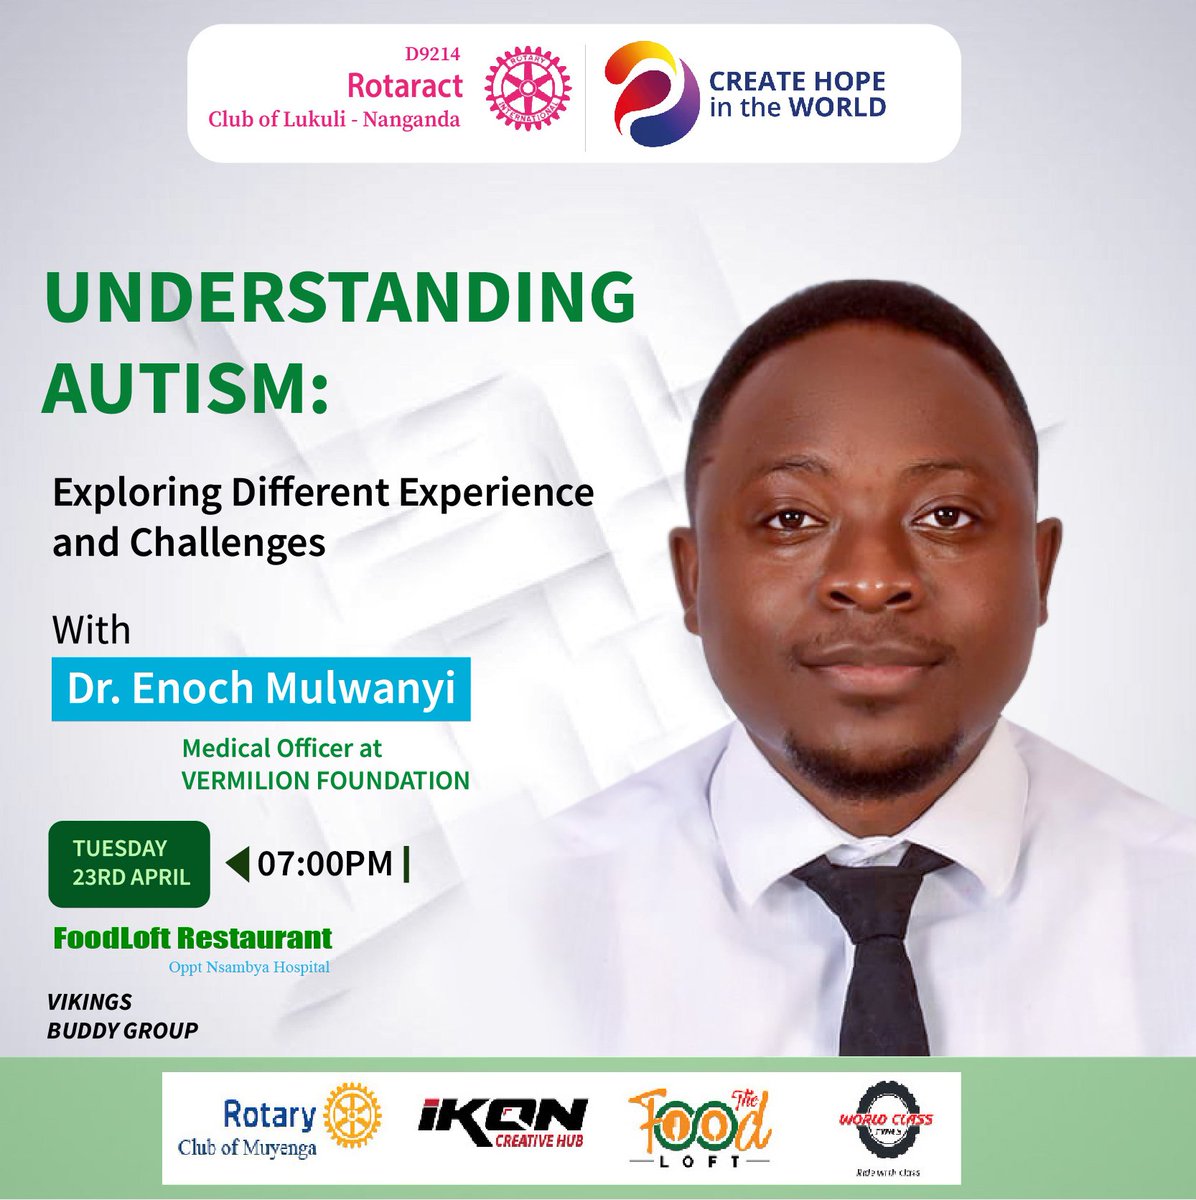 Week 4 is here, and We have prepared an engaging discussion focused on understanding autism.😃 🌹 🌸 🏵 Join us as we take a step towards building a more inclusive community. 😘 Come and enjoy fellowship, the Lukuli-Nanganda Way #AutismAwarenessMonth #AutismAcceptanceMonth